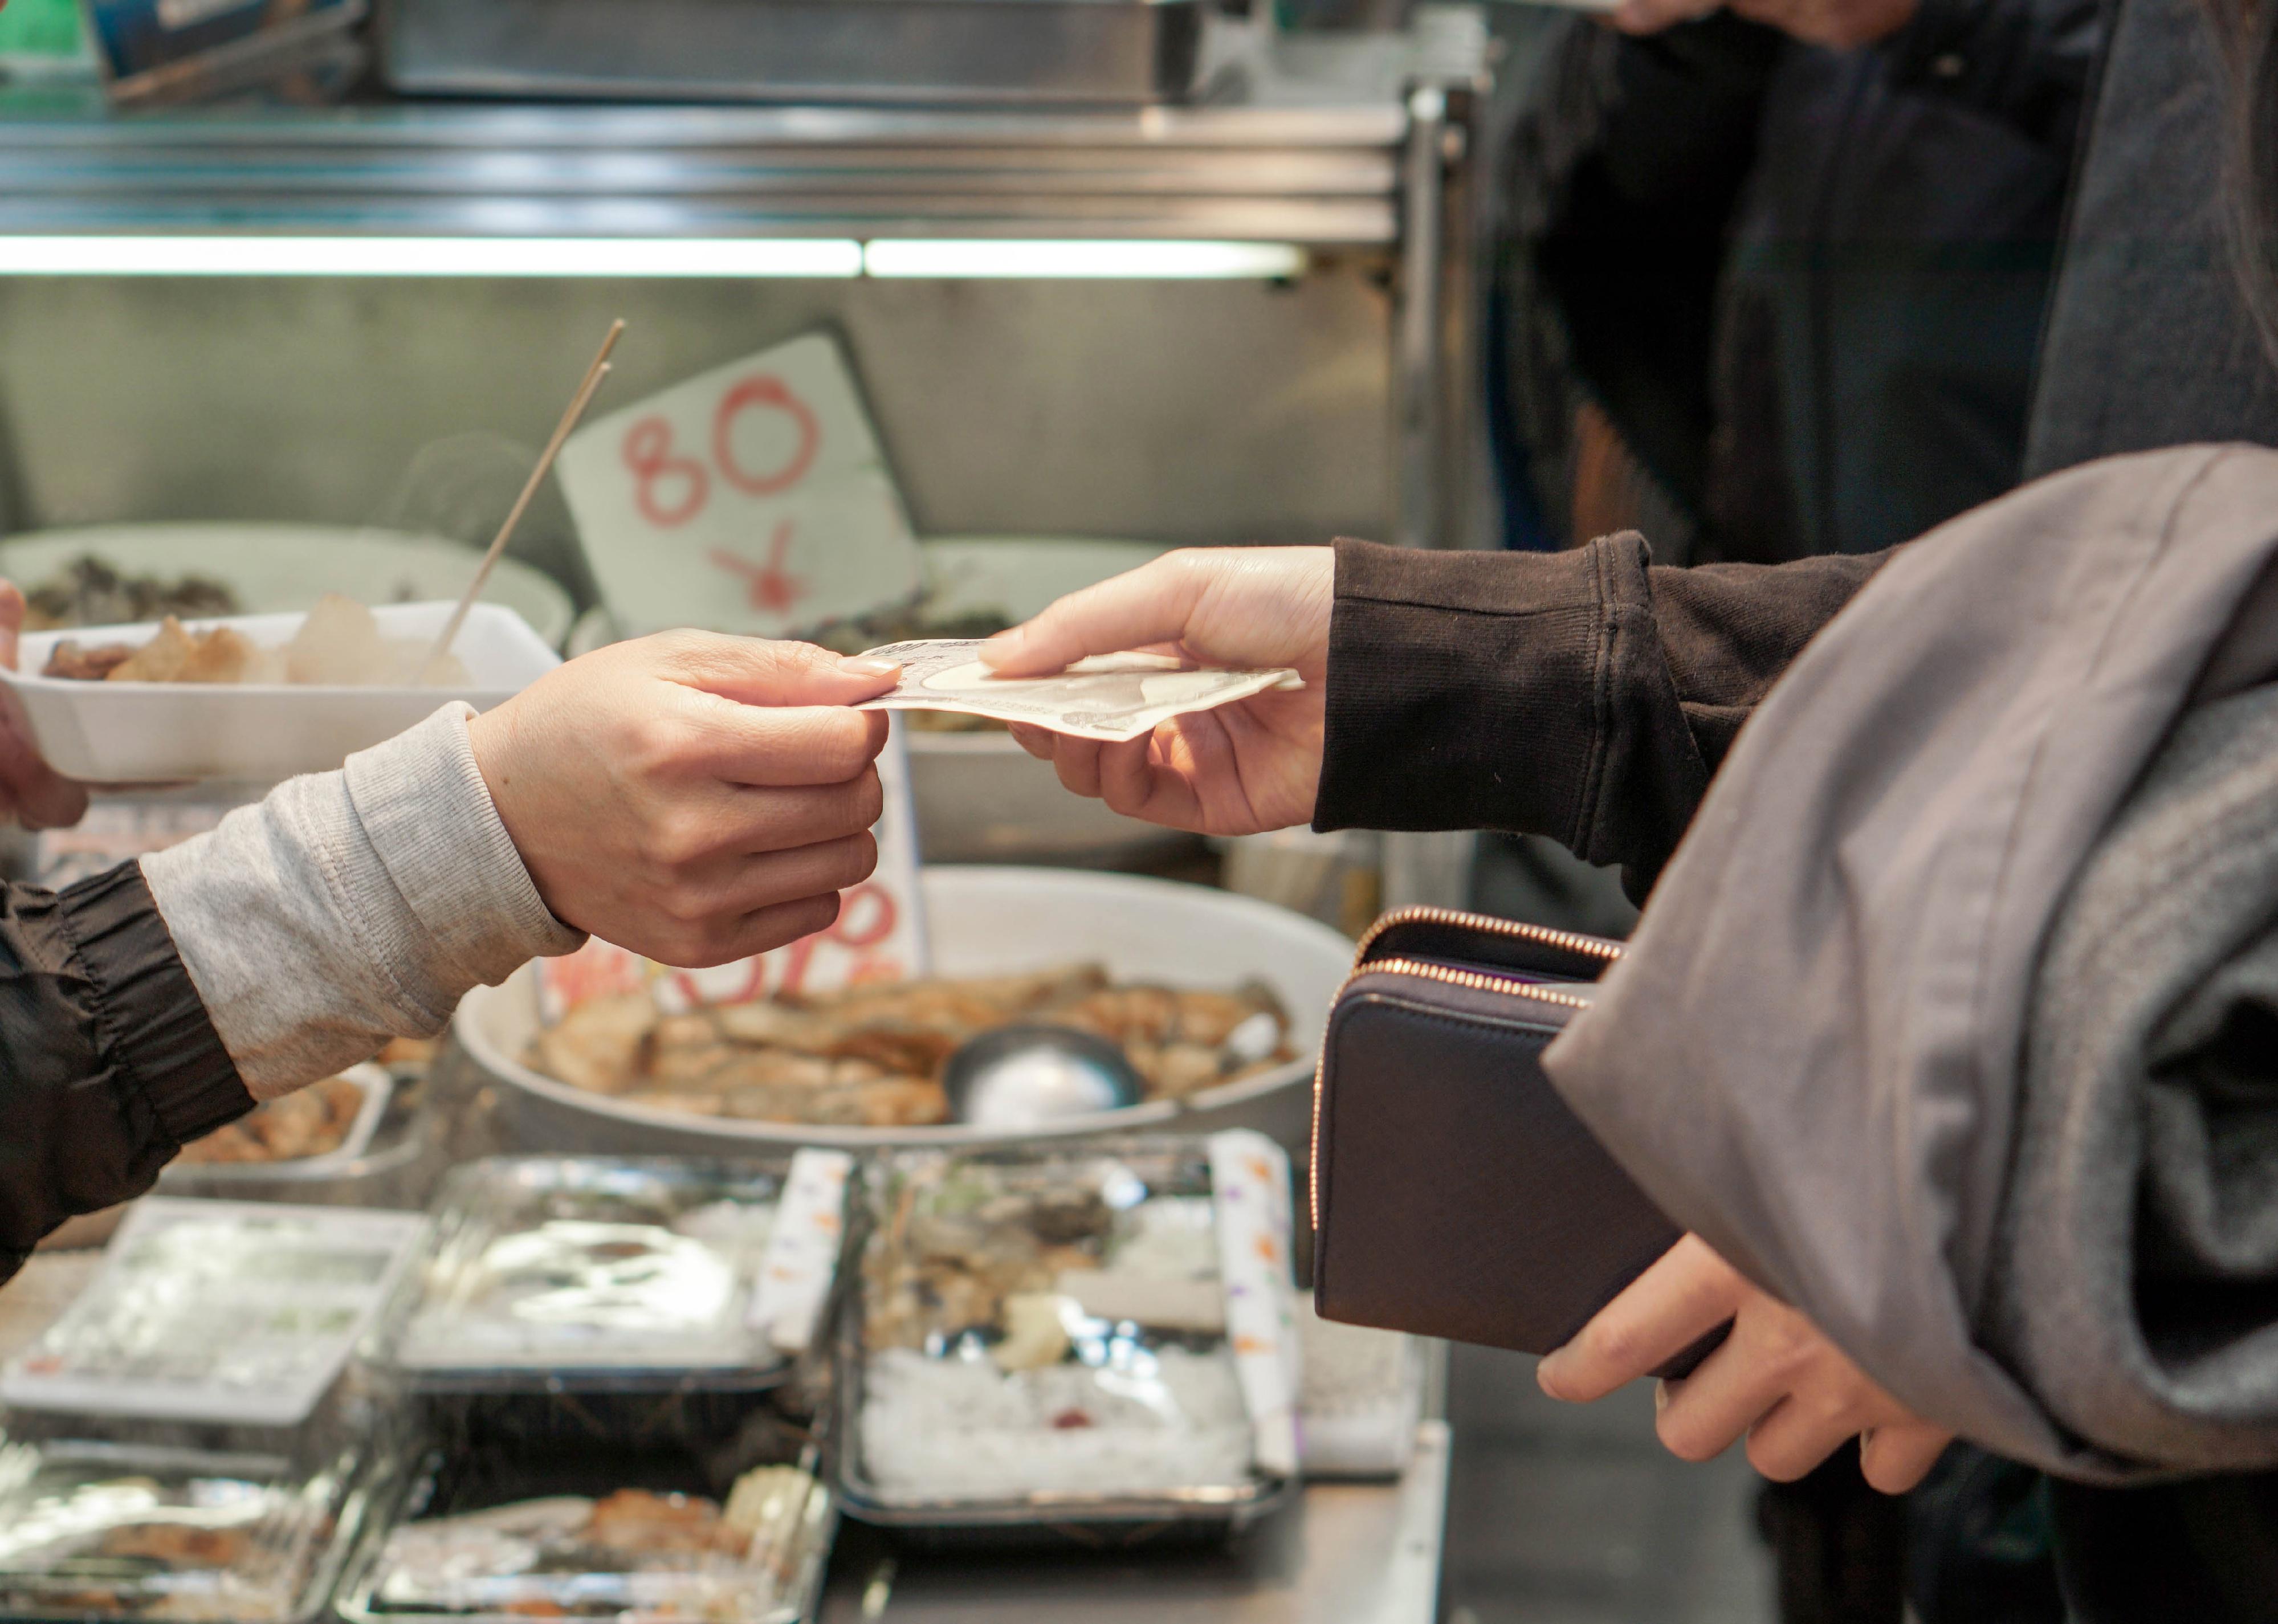 Closeup of customer paying with Japan yen banknote for food in the market.